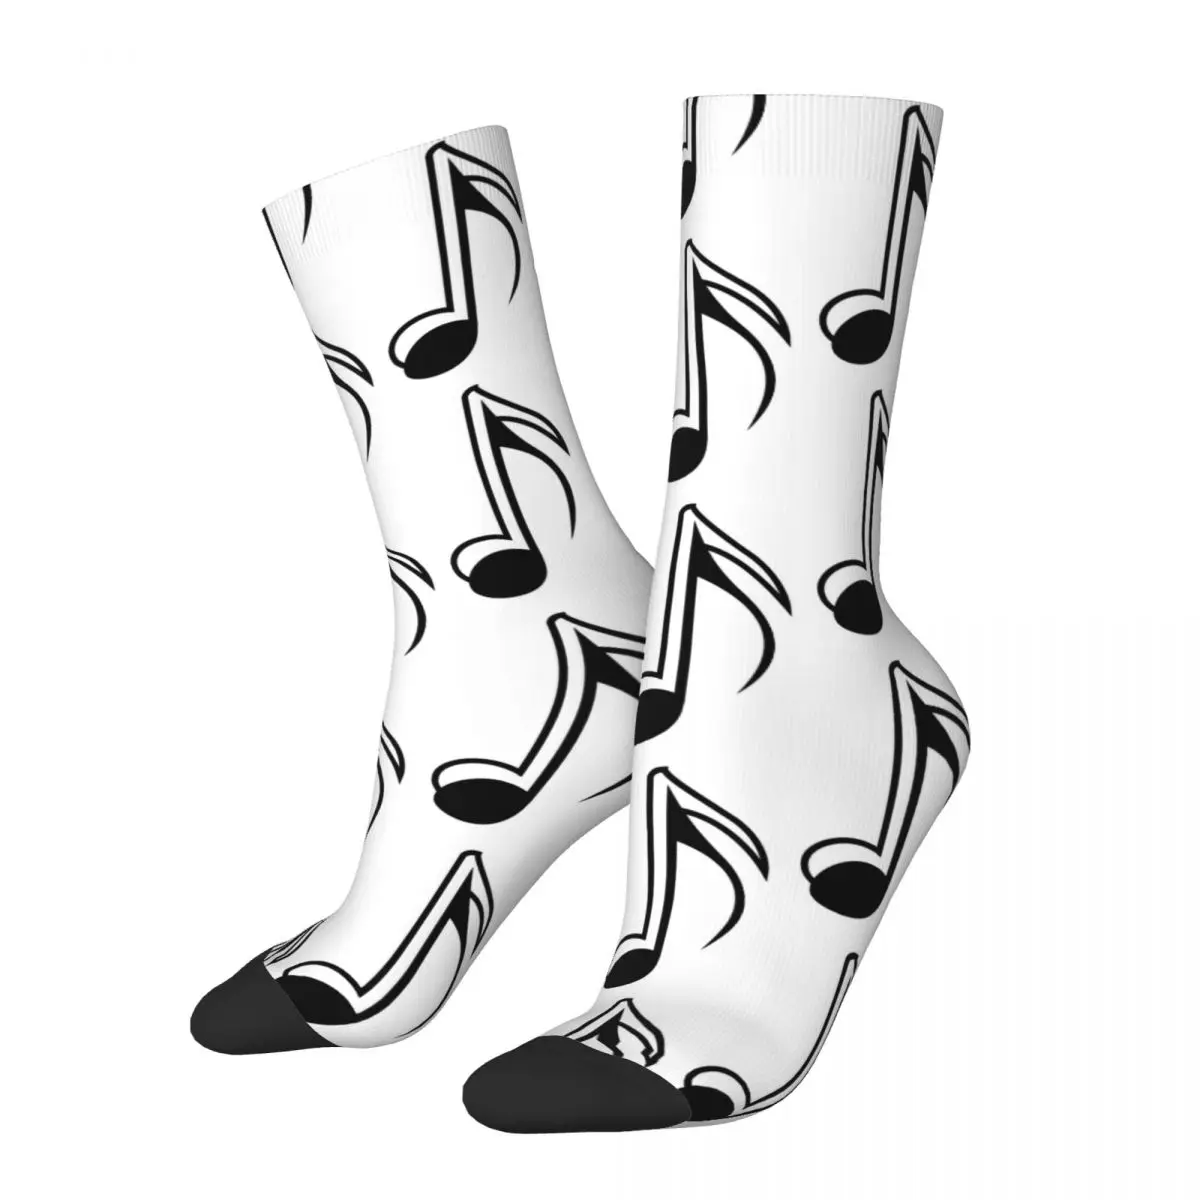 

Men's compression Socks Music Note Vintage Harajuku Interesting Note Street Style Novelty Casual Crew Crazy Sock Gift Printed